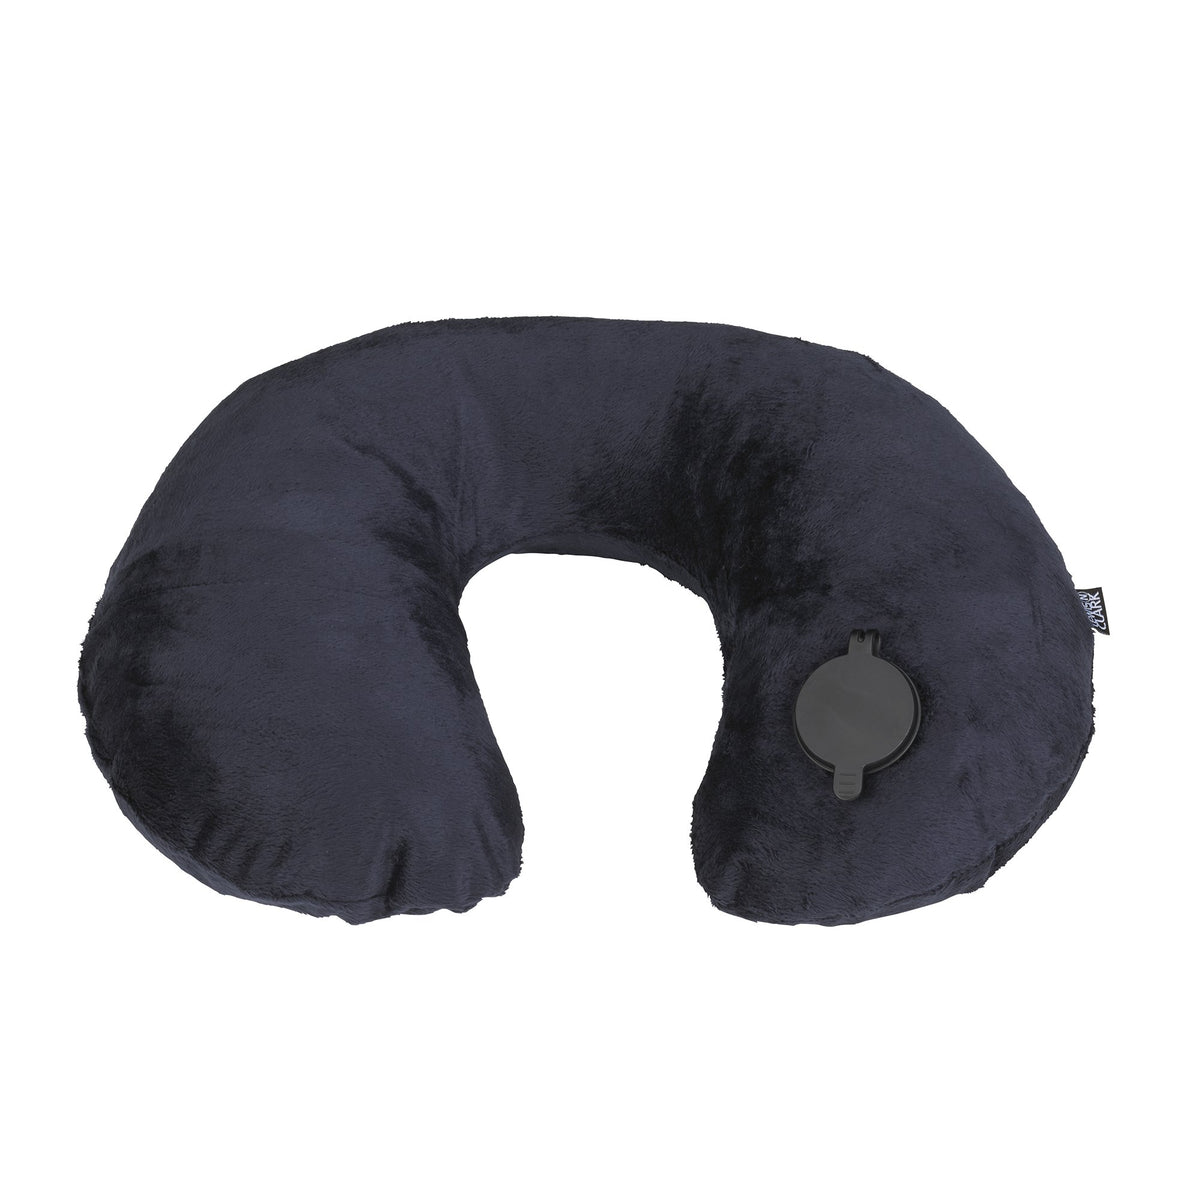 Lewis N. Clark Men's On Air Adjustable and Inflatable Neck Pillow, Blue, One Size U2